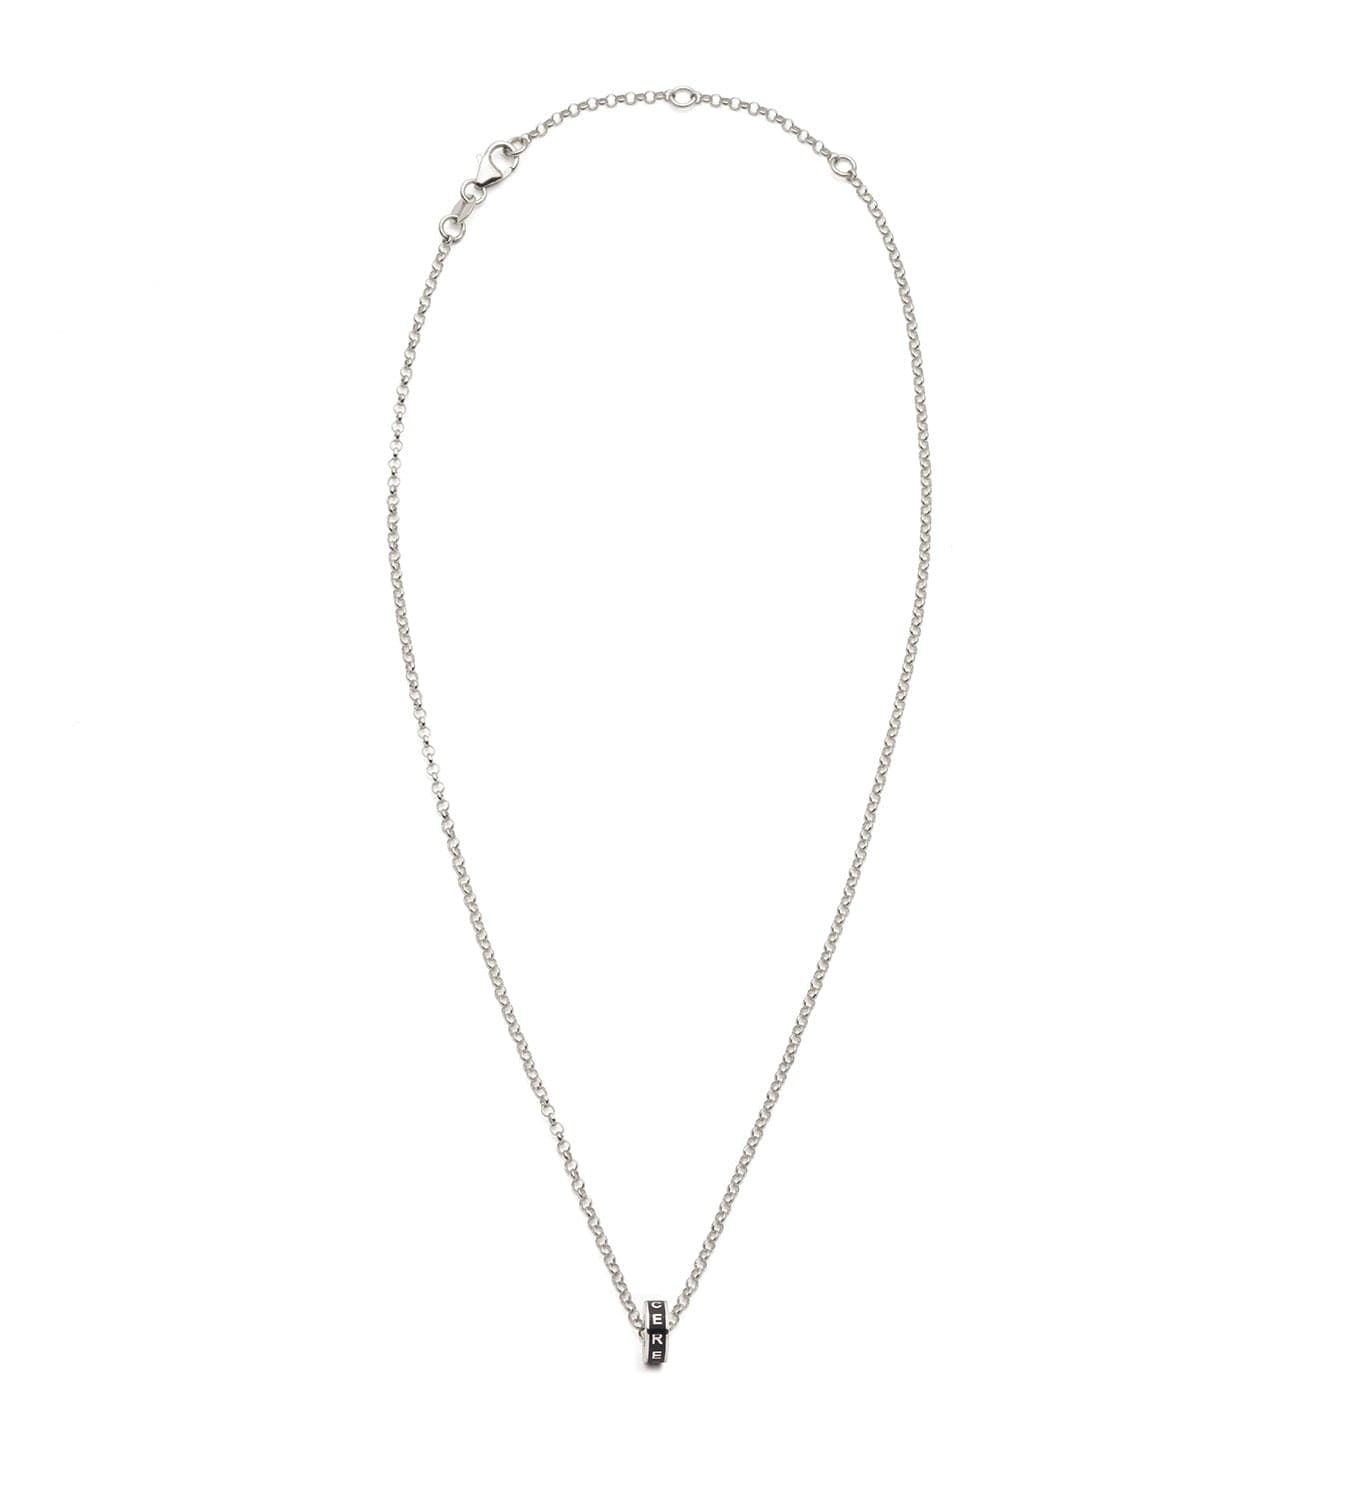 Resilience : Heart Beat Fine Belcher Chain Necklace White Gold